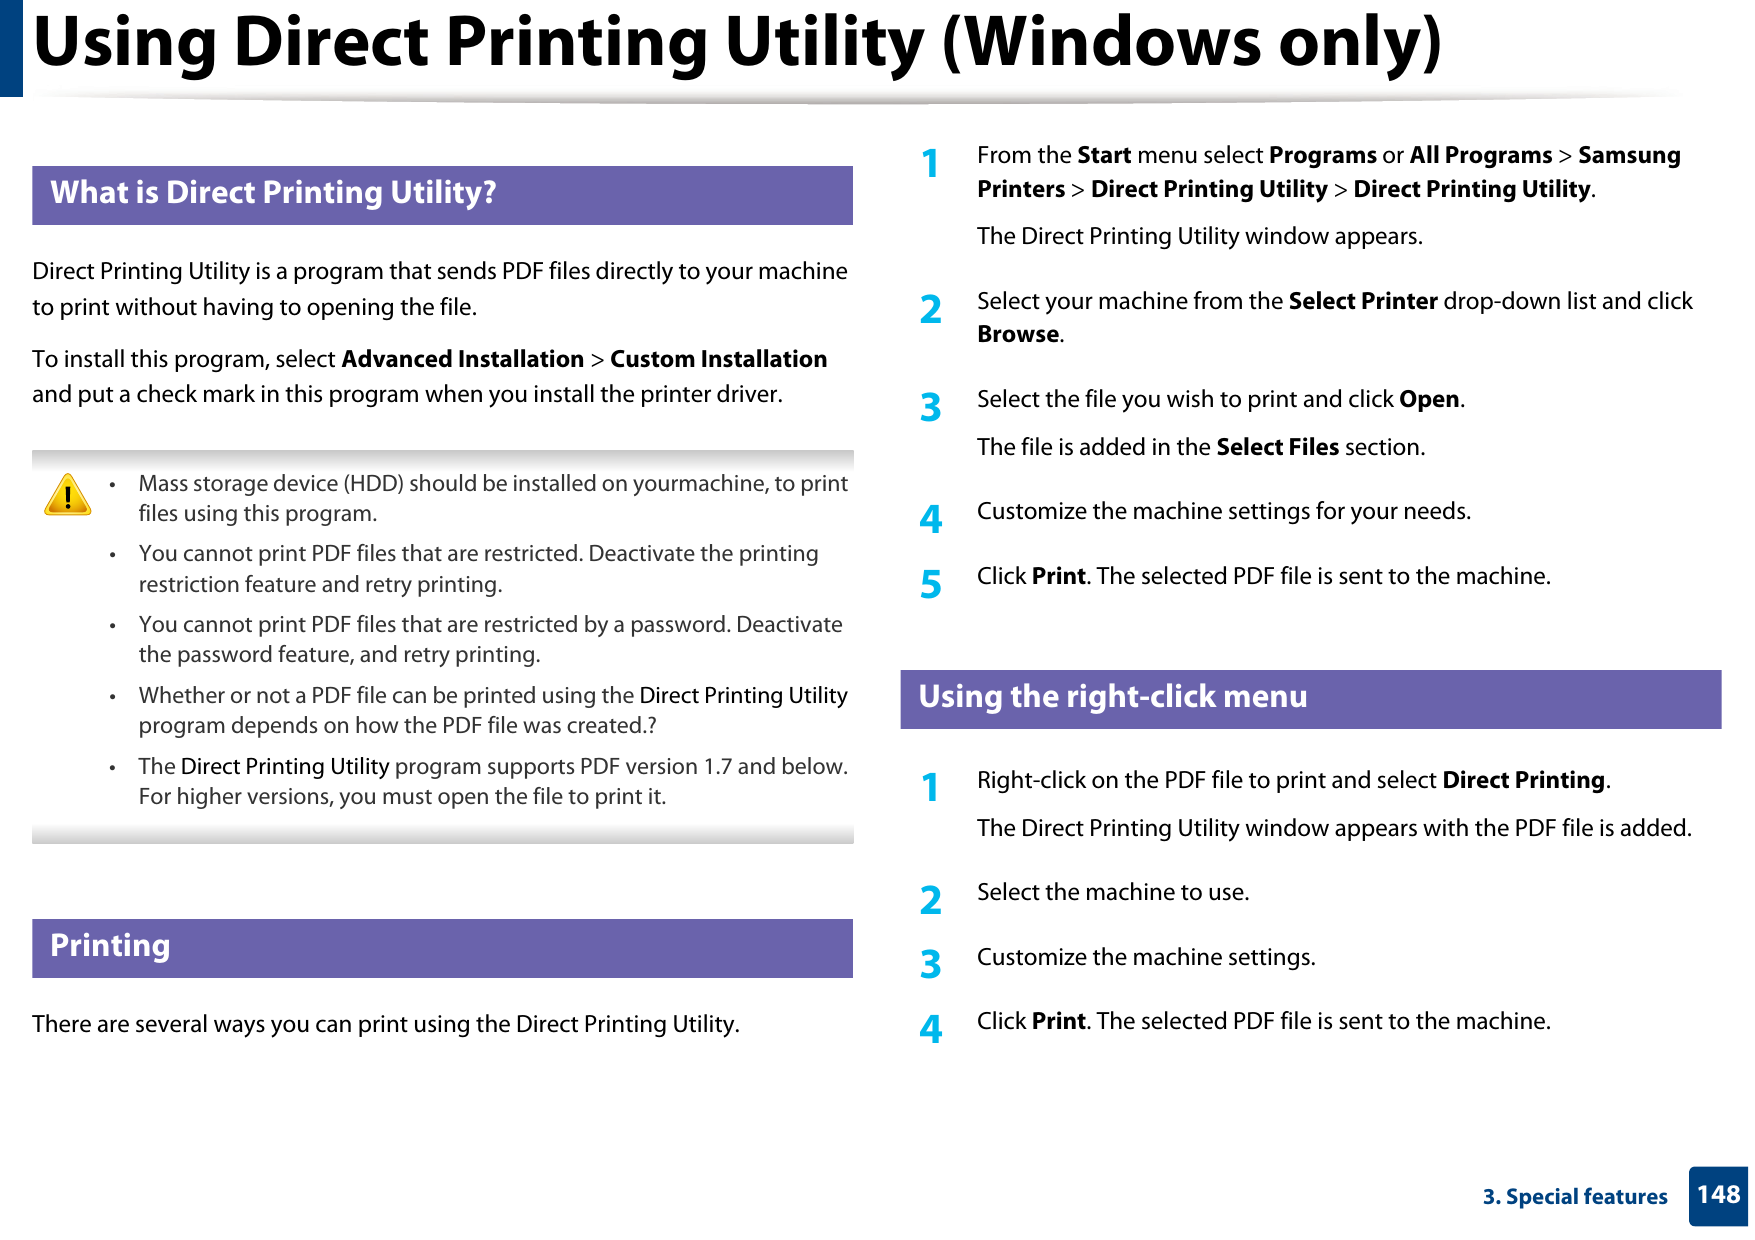 1483. Special featuresUsing Direct Printing Utility (Windows only)3 What is Direct Printing Utility?Direct Printing Utility is a program that sends PDF files directly to your machine to print without having to opening the file.To install this program, select Advanced Installation &gt; Custom Installation and put a check mark in this program when you install the printer driver. • Mass storage device (HDD) should be installed on yourmachine, to print files using this program.• You cannot print PDF files that are restricted. Deactivate the printing restriction feature and retry printing.• You cannot print PDF files that are restricted by a password. Deactivate the password feature, and retry printing.• Whether or not a PDF file can be printed using the Direct Printing Utility program depends on how the PDF file was created.?• The Direct Printing Utility program supports PDF version 1.7 and below. For higher versions, you must open the file to print it. 4 PrintingThere are several ways you can print using the Direct Printing Utility.1From the Start menu select Programs or All Programs &gt; Samsung Printers &gt; Direct Printing Utility &gt; Direct Printing Utility.The Direct Printing Utility window appears.2  Select your machine from the Select Printer drop-down list and click Browse.3  Select the file you wish to print and click Open.The file is added in the Select Files section.4  Customize the machine settings for your needs. 5  Click Print. The selected PDF file is sent to the machine.5 Using the right-click menu1Right-click on the PDF file to print and select Direct Printing.The Direct Printing Utility window appears with the PDF file is added.2  Select the machine to use.3  Customize the machine settings. 4  Click Print. The selected PDF file is sent to the machine.